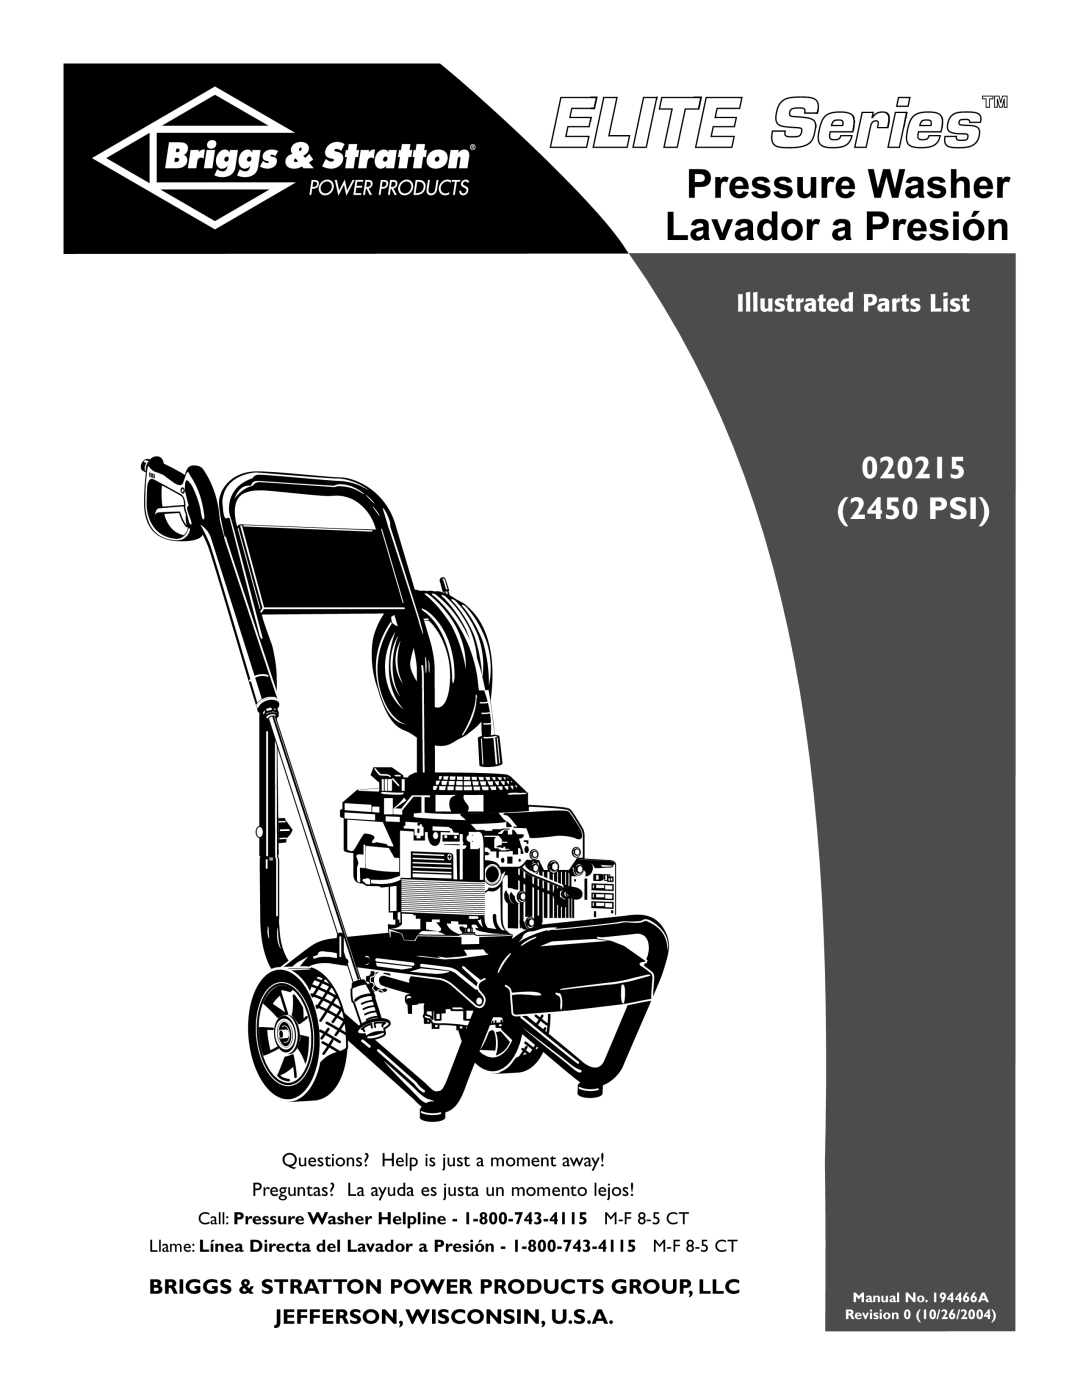 Briggs & Stratton manual 020215 2450 PSI, Illustrated Parts List, Briggs & Stratton Power Products Group, Llc 